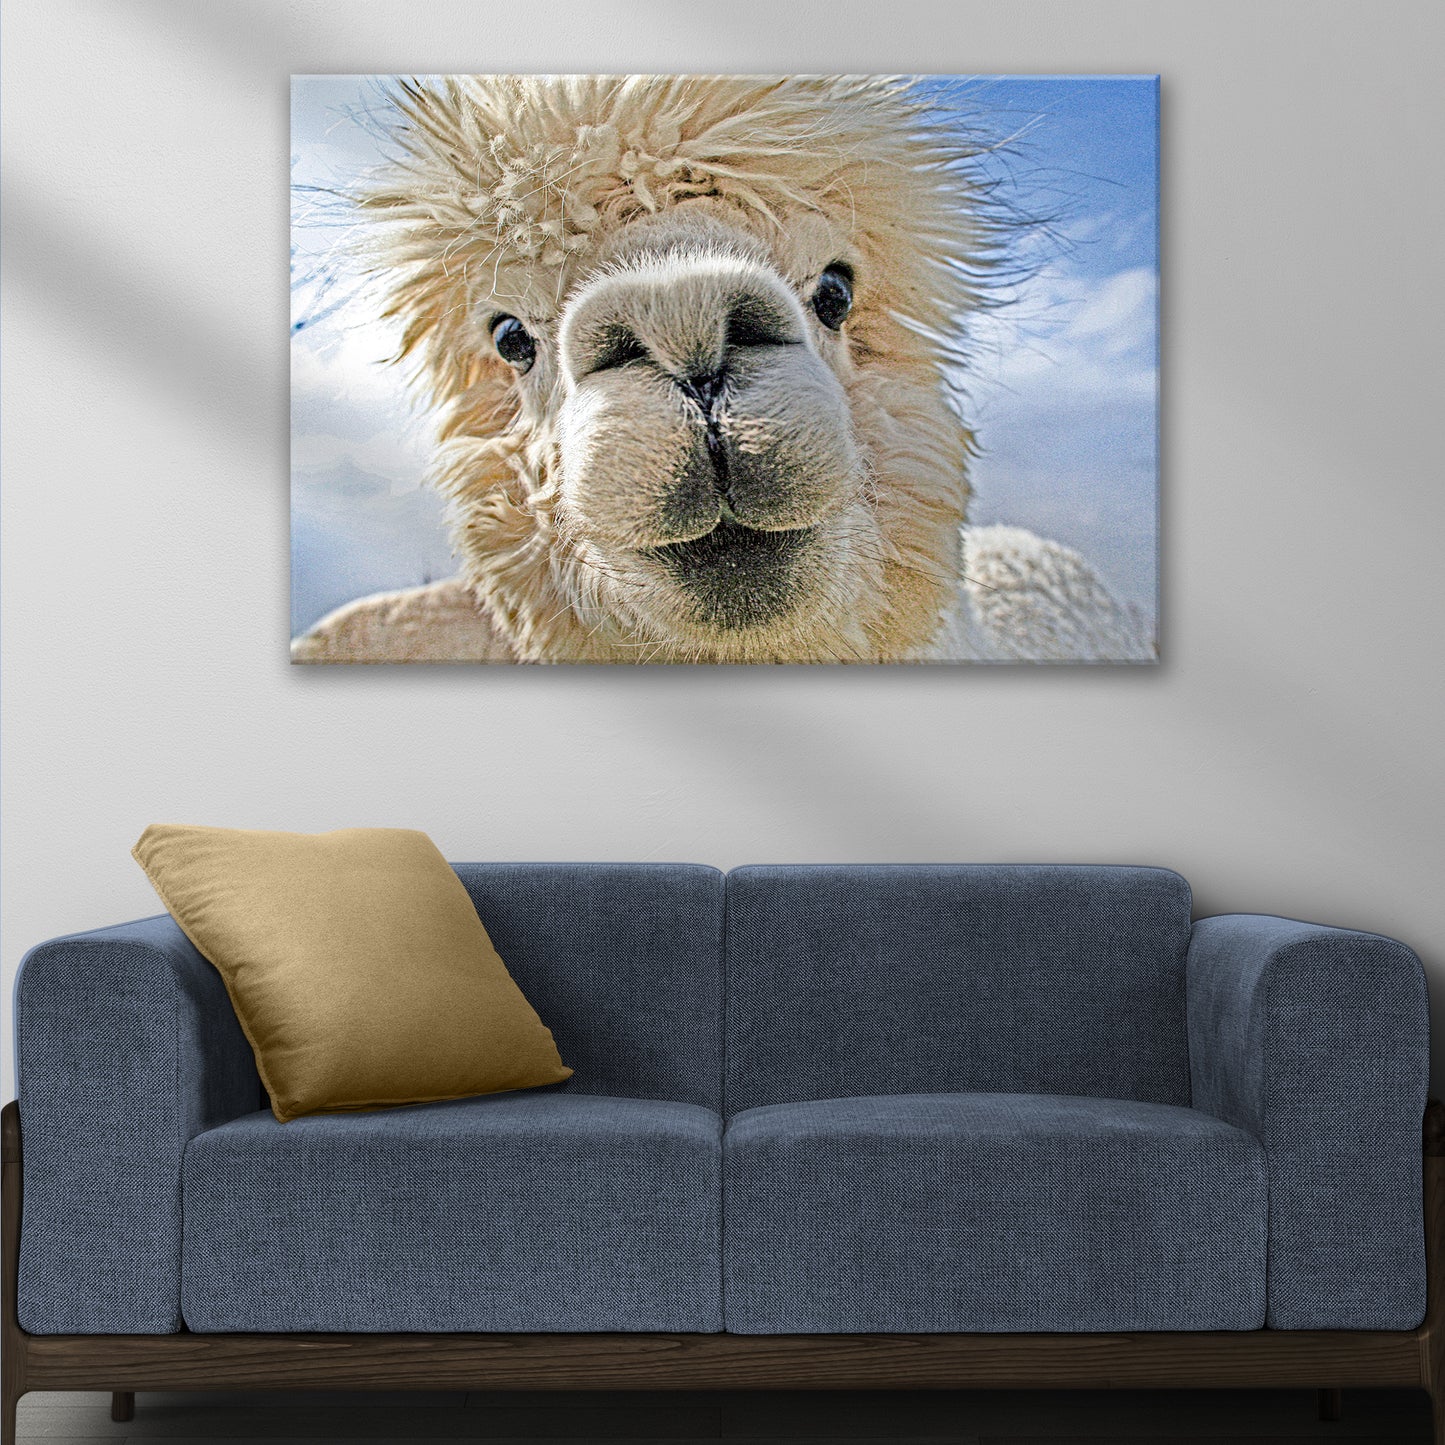 Funny Llama Selfie Canvas Wall Art Style 2 - Image by Tailored Canvases